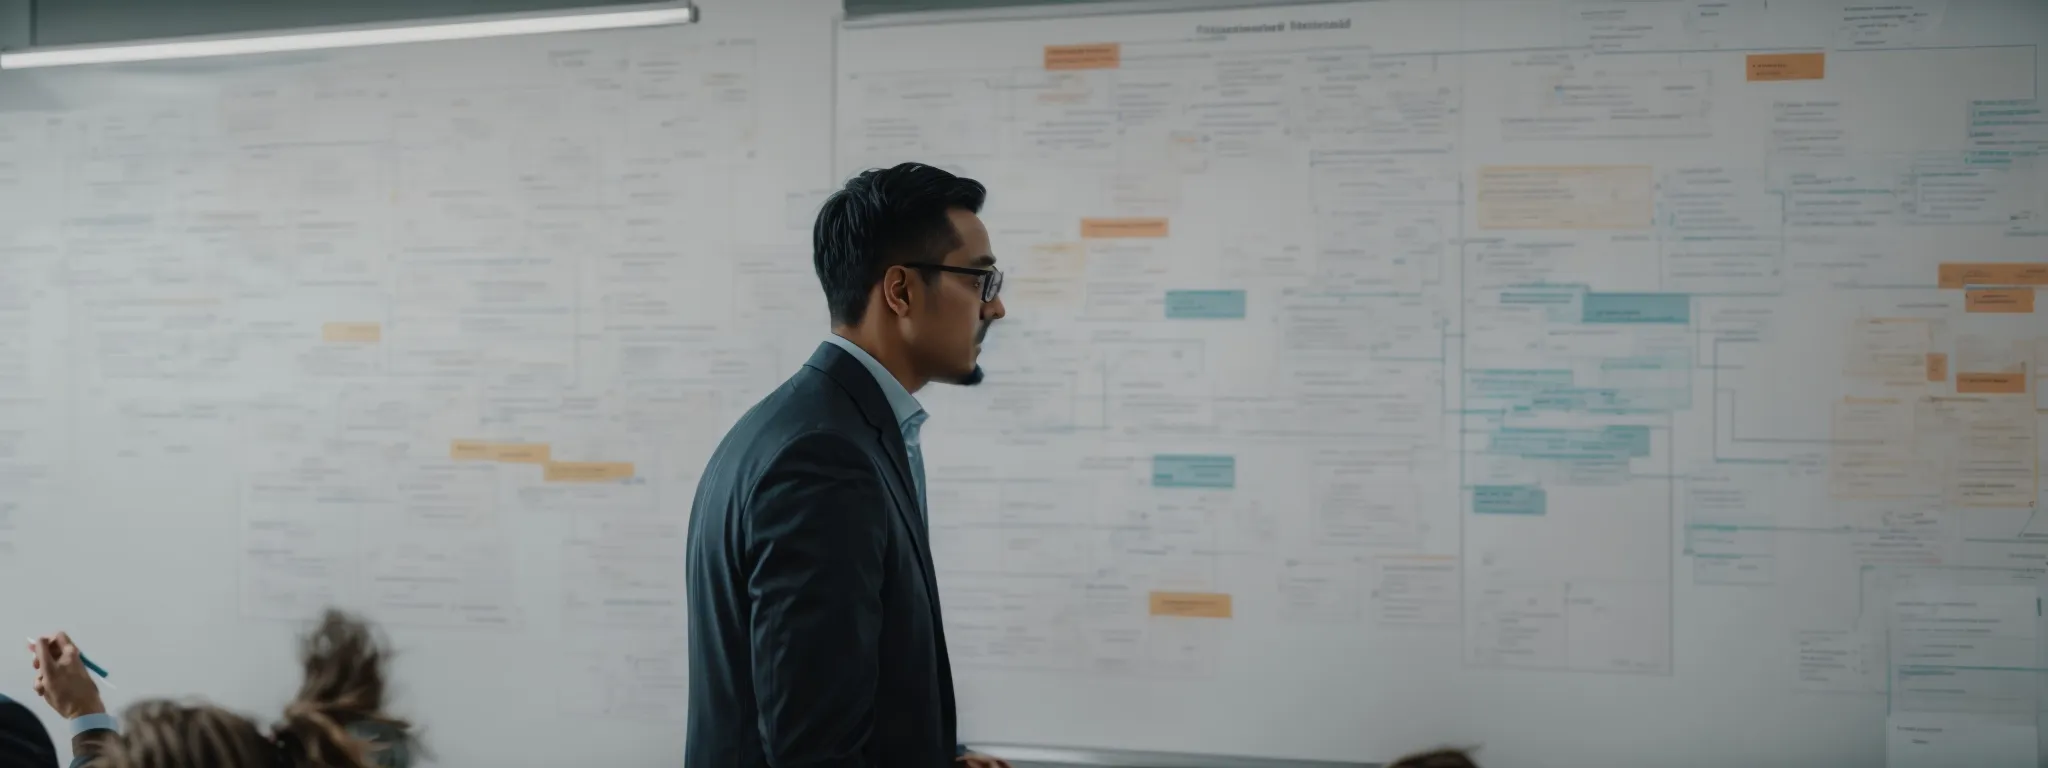 a professional deliberating over a whiteboard filled with various interconnected keyword clusters and hierarchy charts.